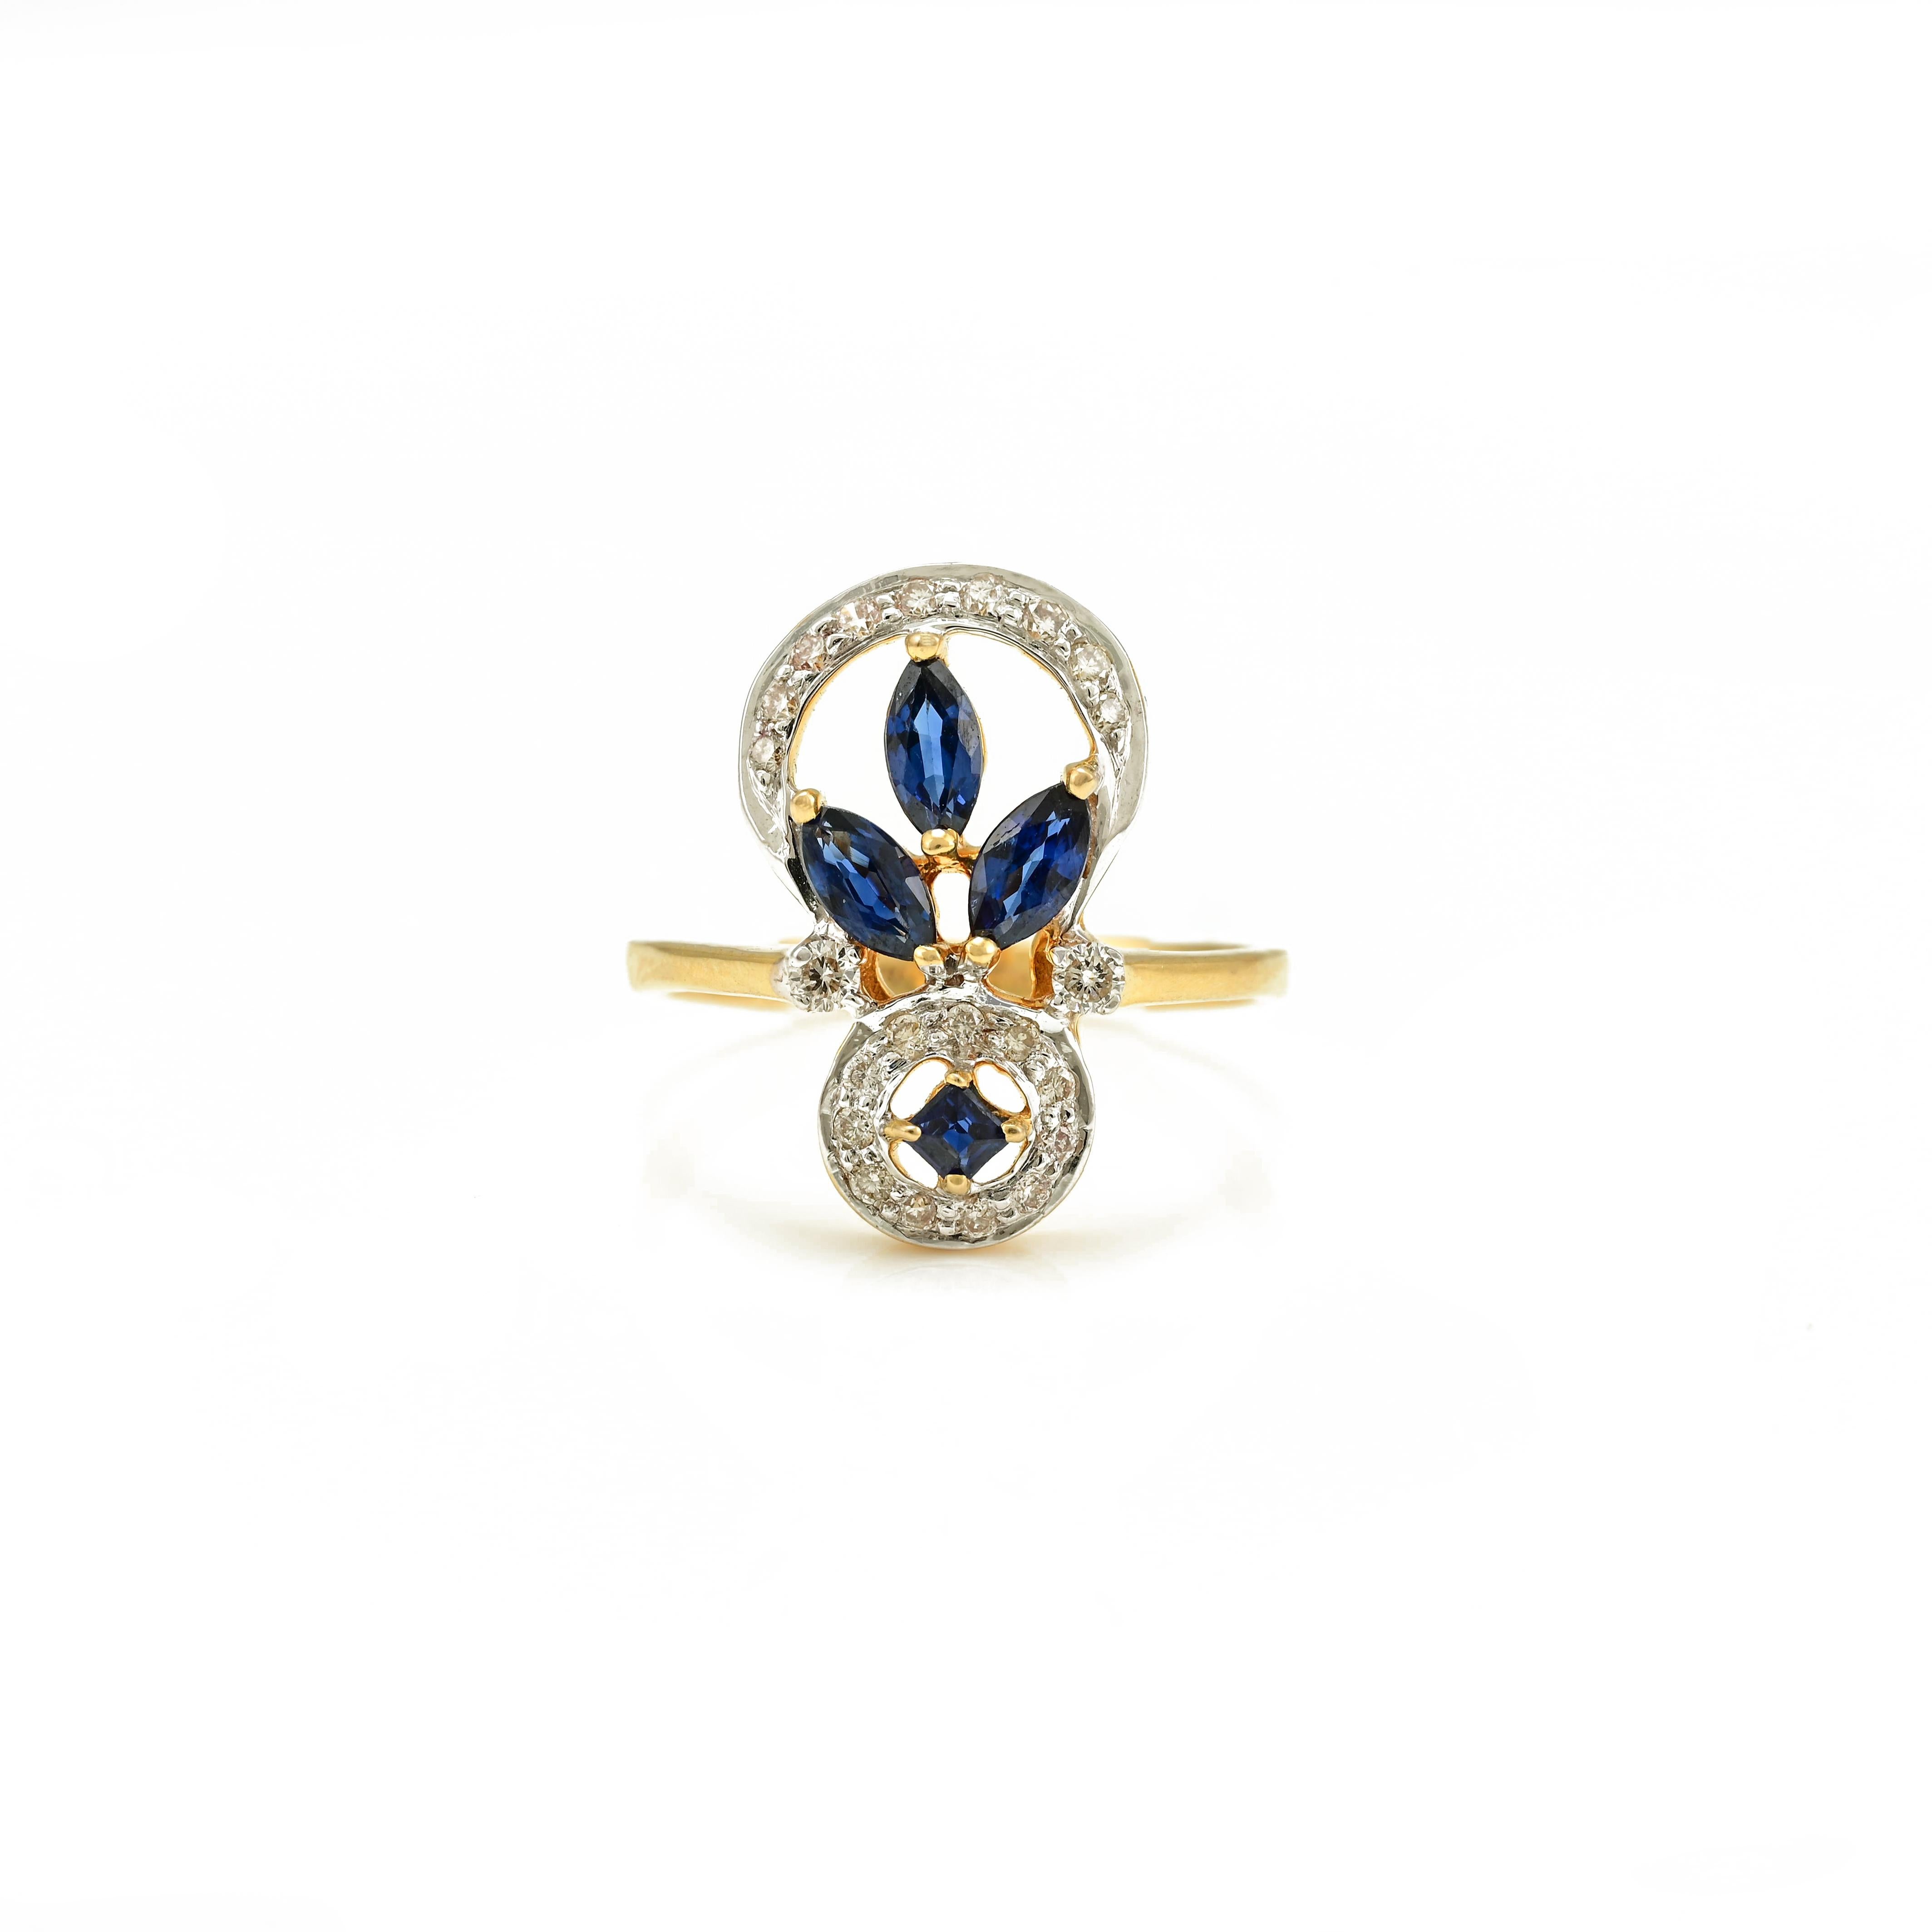 For Sale:  18k Solid Yellow Gold Contemporary Diamond and Blue Sapphire Statement Ring 3